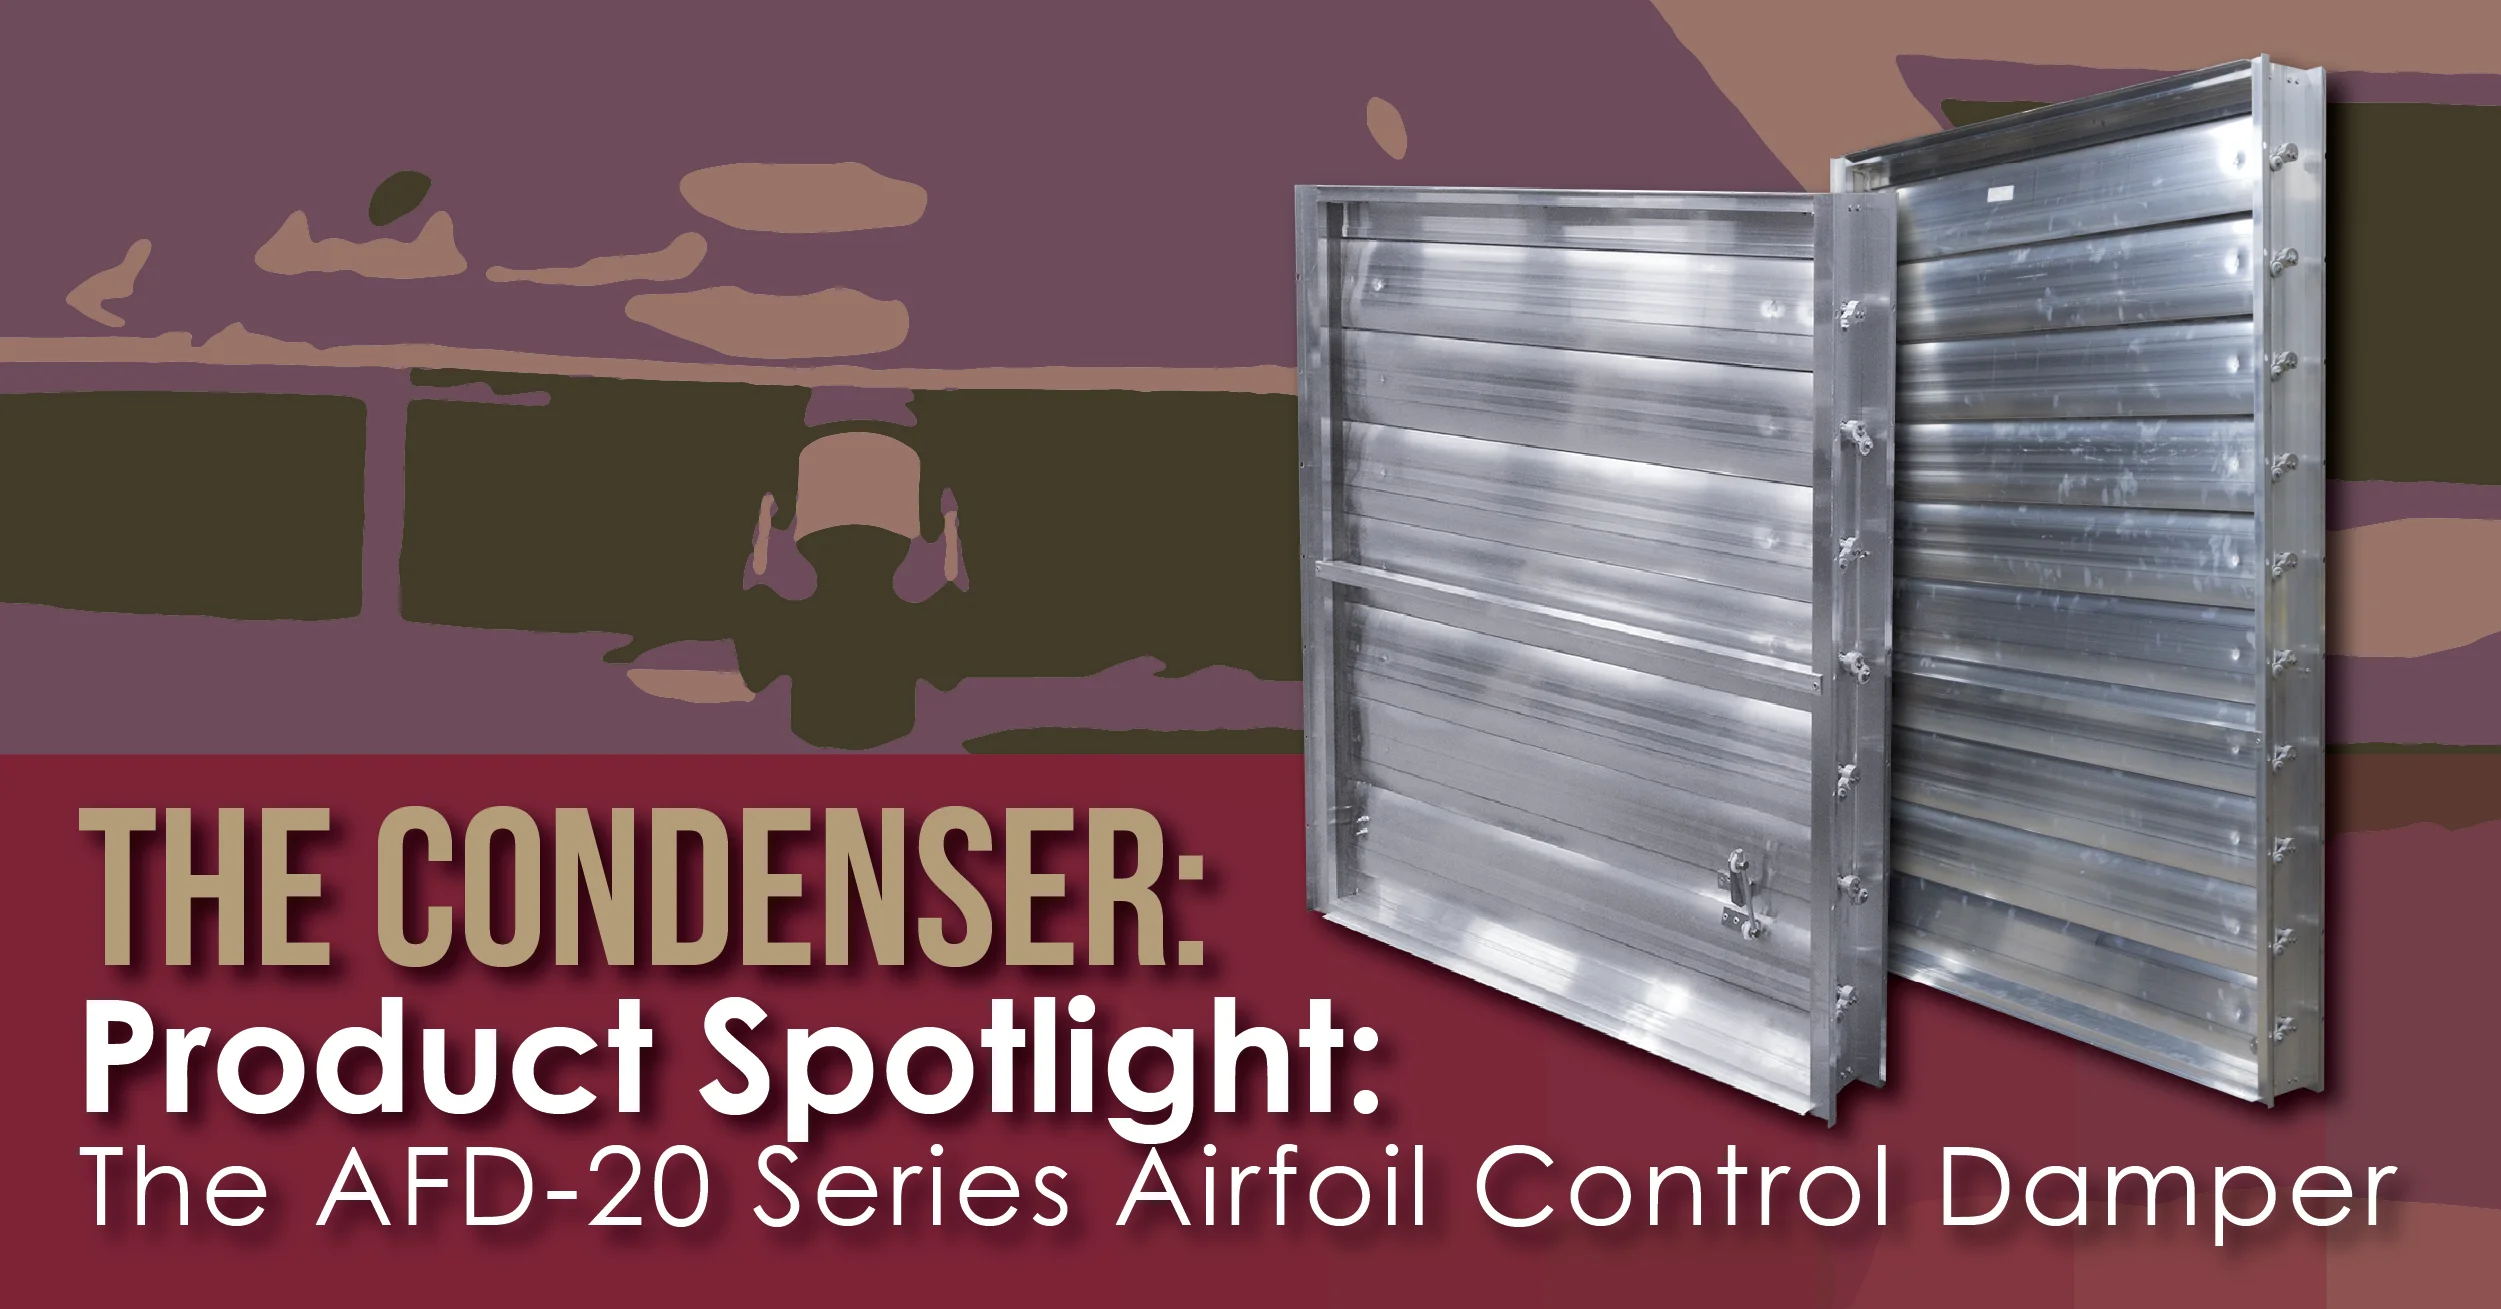 Product Spotlight: The AFD-20 Series Airfoil Control Damper